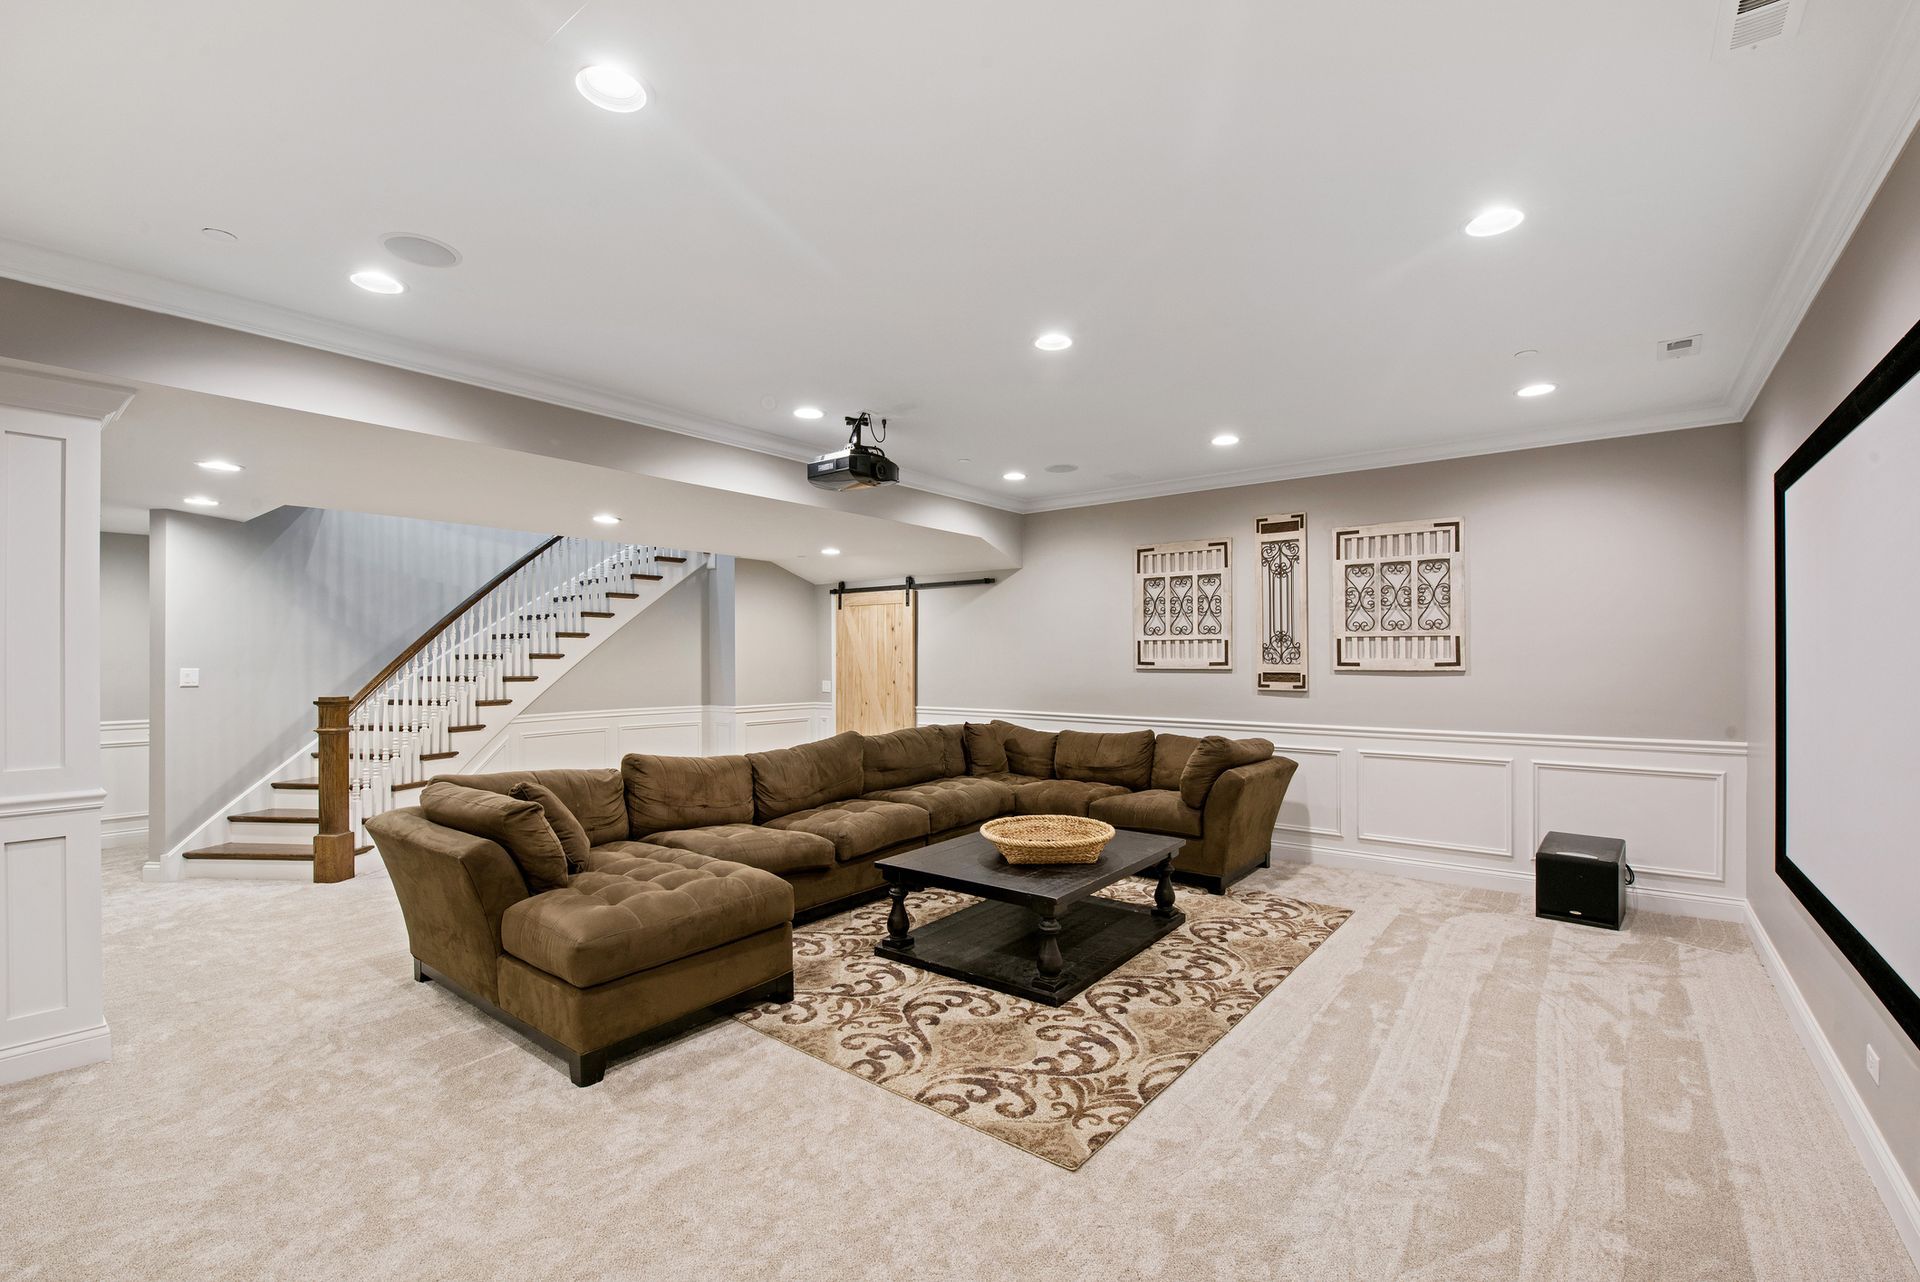 Spacious basement room for movie watching and gatherings with family